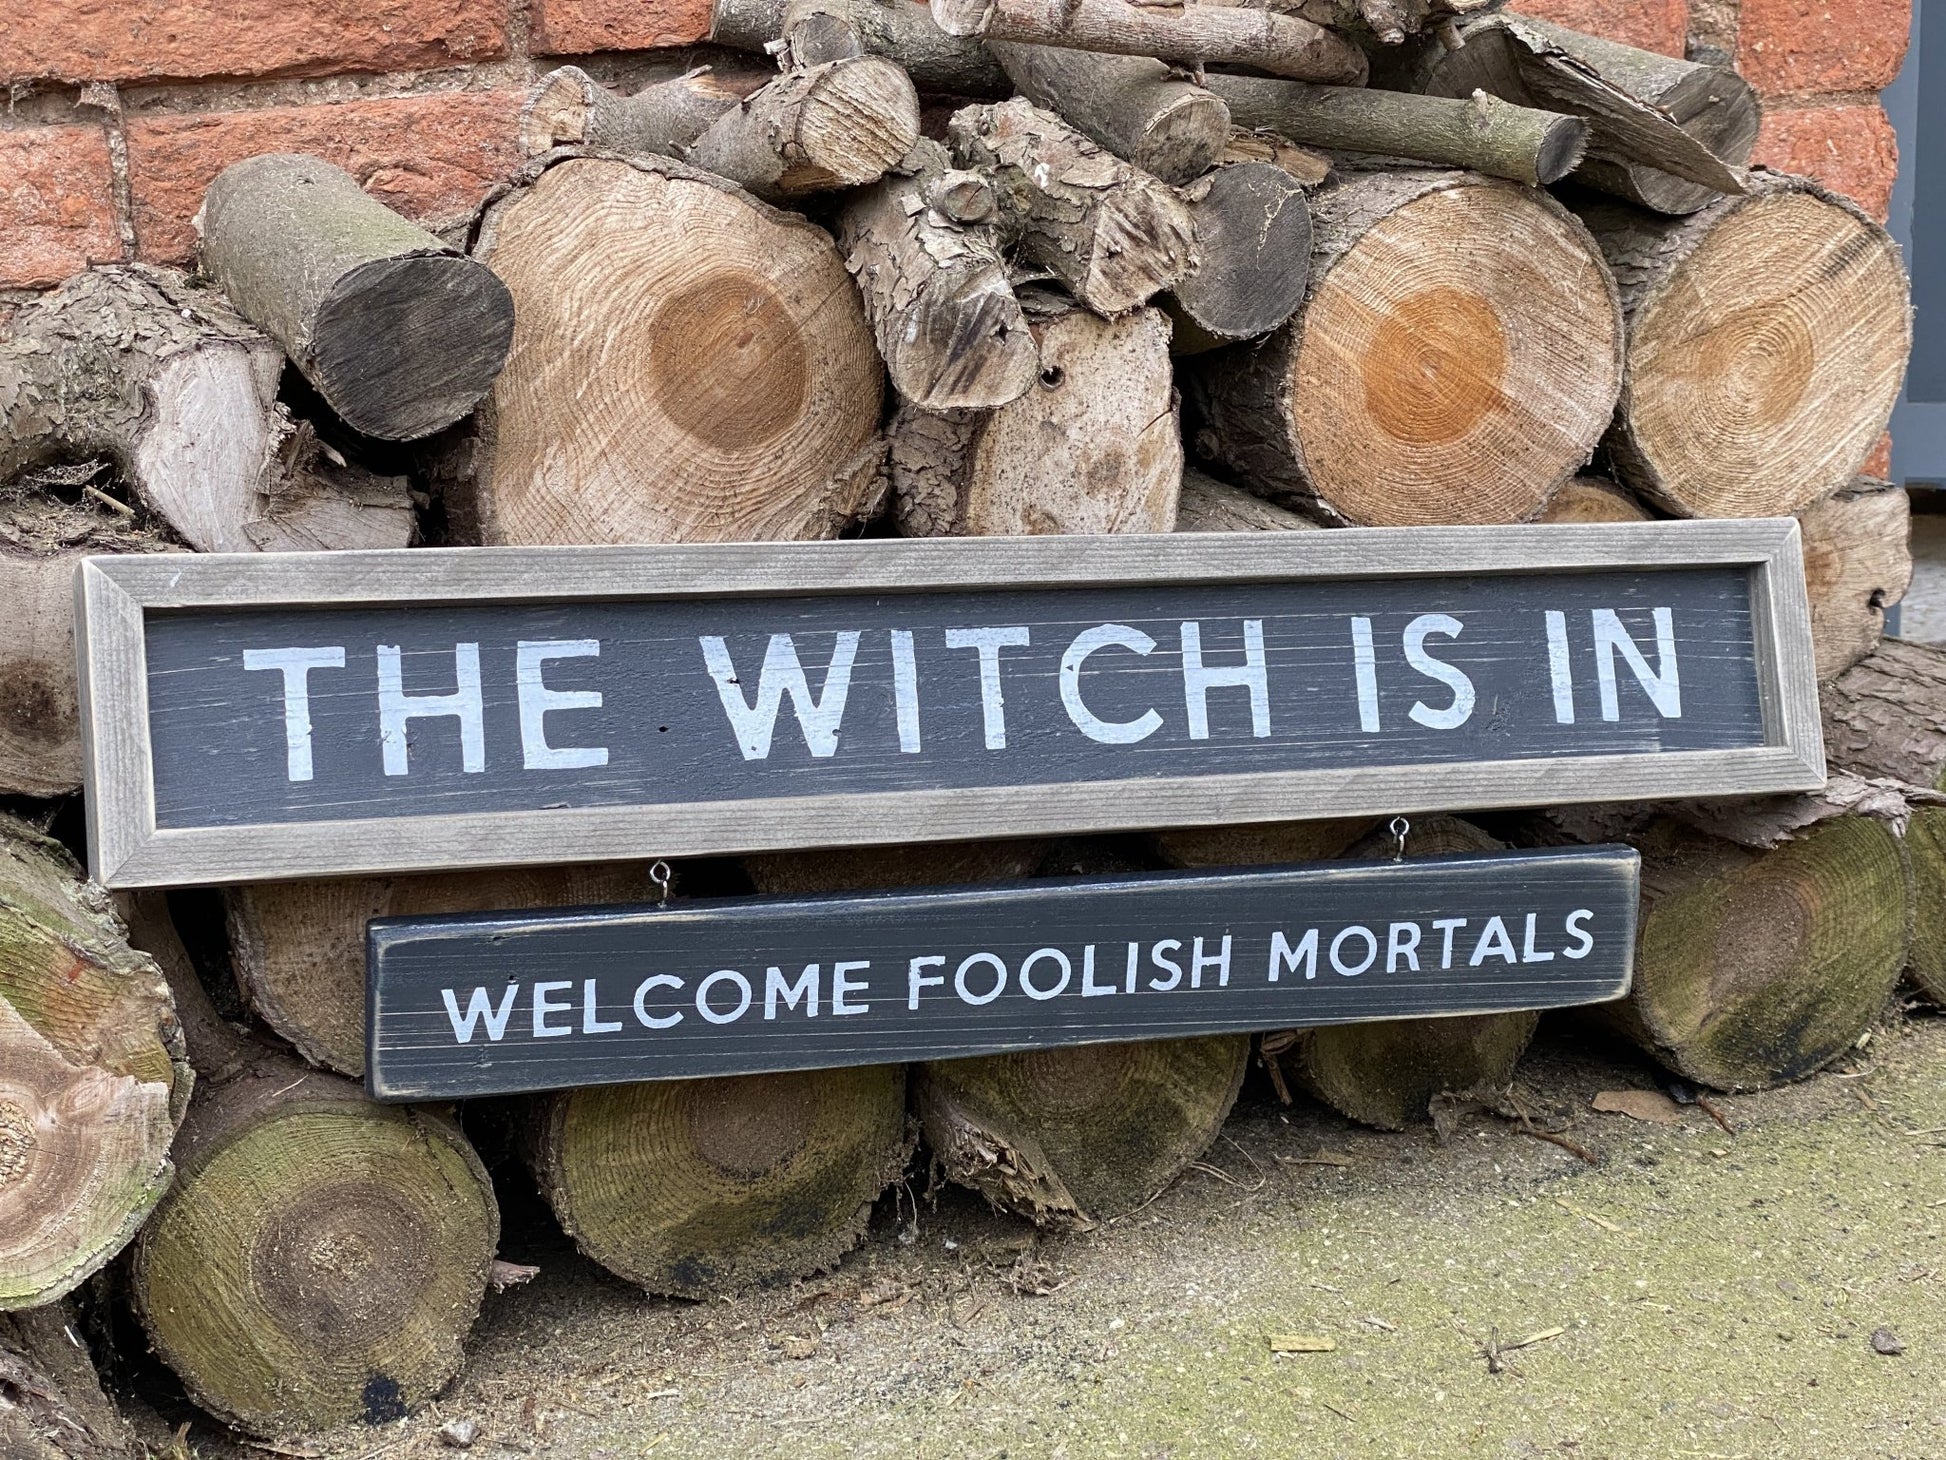 The Witch Is In | Framed Rustic Long Wood Sign - The Imperfect Wood Company - Rustic Framed Long Wood Sign